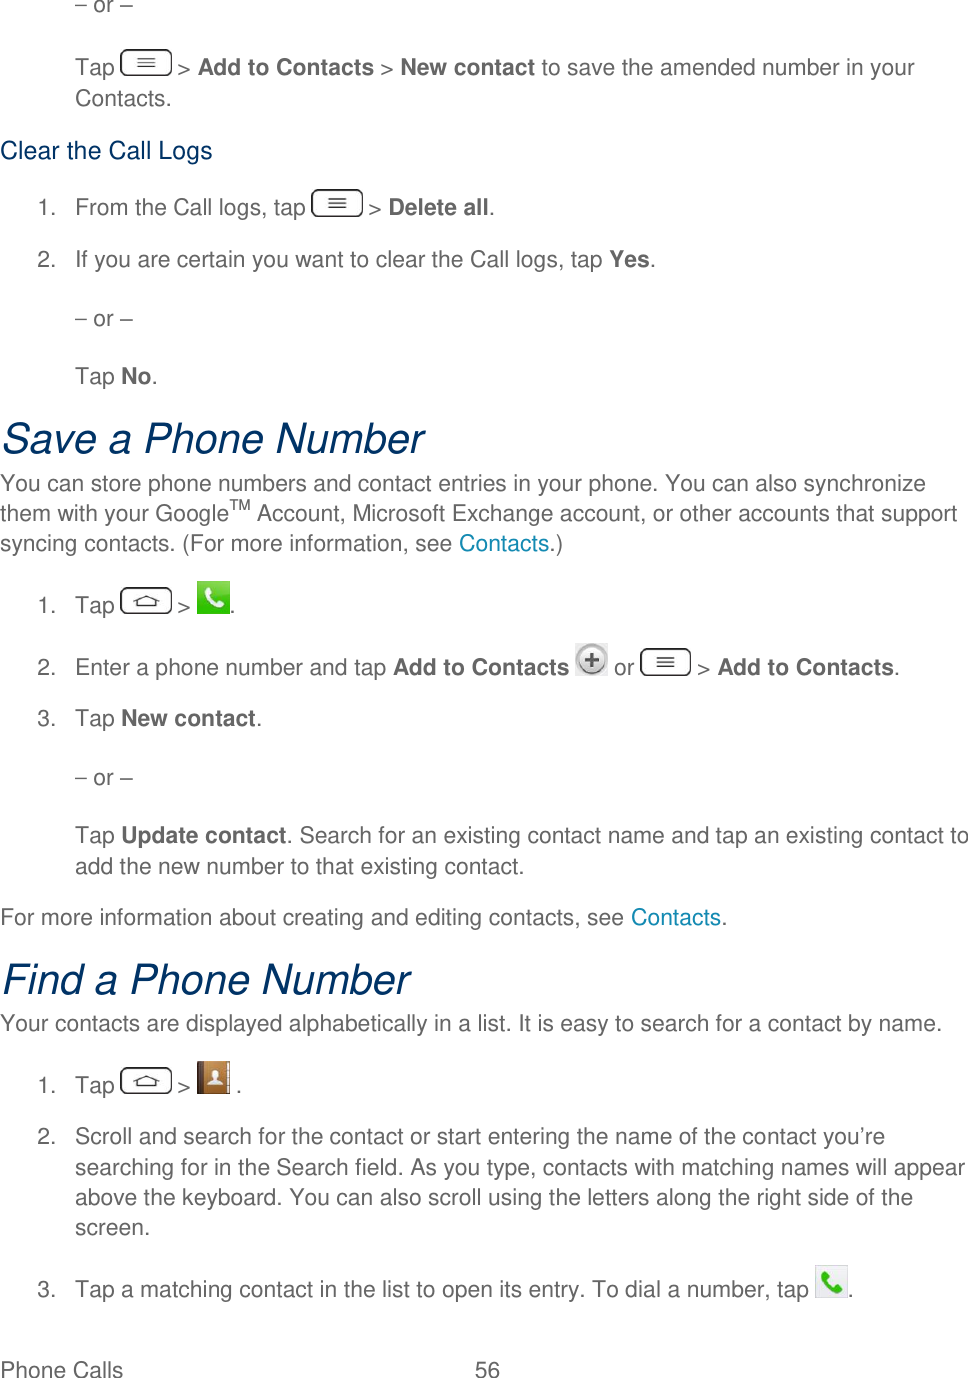  Phone Calls  56   – or – Tap   &gt; Add to Contacts &gt; New contact to save the amended number in your Contacts. Clear the Call Logs 1.  From the Call logs, tap   &gt; Delete all. 2.  If you are certain you want to clear the Call logs, tap Yes. – or – Tap No. Save a Phone Number You can store phone numbers and contact entries in your phone. You can also synchronize them with your GoogleTM Account, Microsoft Exchange account, or other accounts that support syncing contacts. (For more information, see Contacts.) 1.  Tap   &gt;  . 2.  Enter a phone number and tap Add to Contacts   or   &gt; Add to Contacts. 3.  Tap New contact. – or – Tap Update contact. Search for an existing contact name and tap an existing contact to add the new number to that existing contact. For more information about creating and editing contacts, see Contacts. Find a Phone Number Your contacts are displayed alphabetically in a list. It is easy to search for a contact by name. 1.  Tap   &gt;   . 2.  Scroll and search for the contact or start entering the name of the contact you‘re searching for in the Search field. As you type, contacts with matching names will appear above the keyboard. You can also scroll using the letters along the right side of the screen. 3.  Tap a matching contact in the list to open its entry. To dial a number, tap  . 